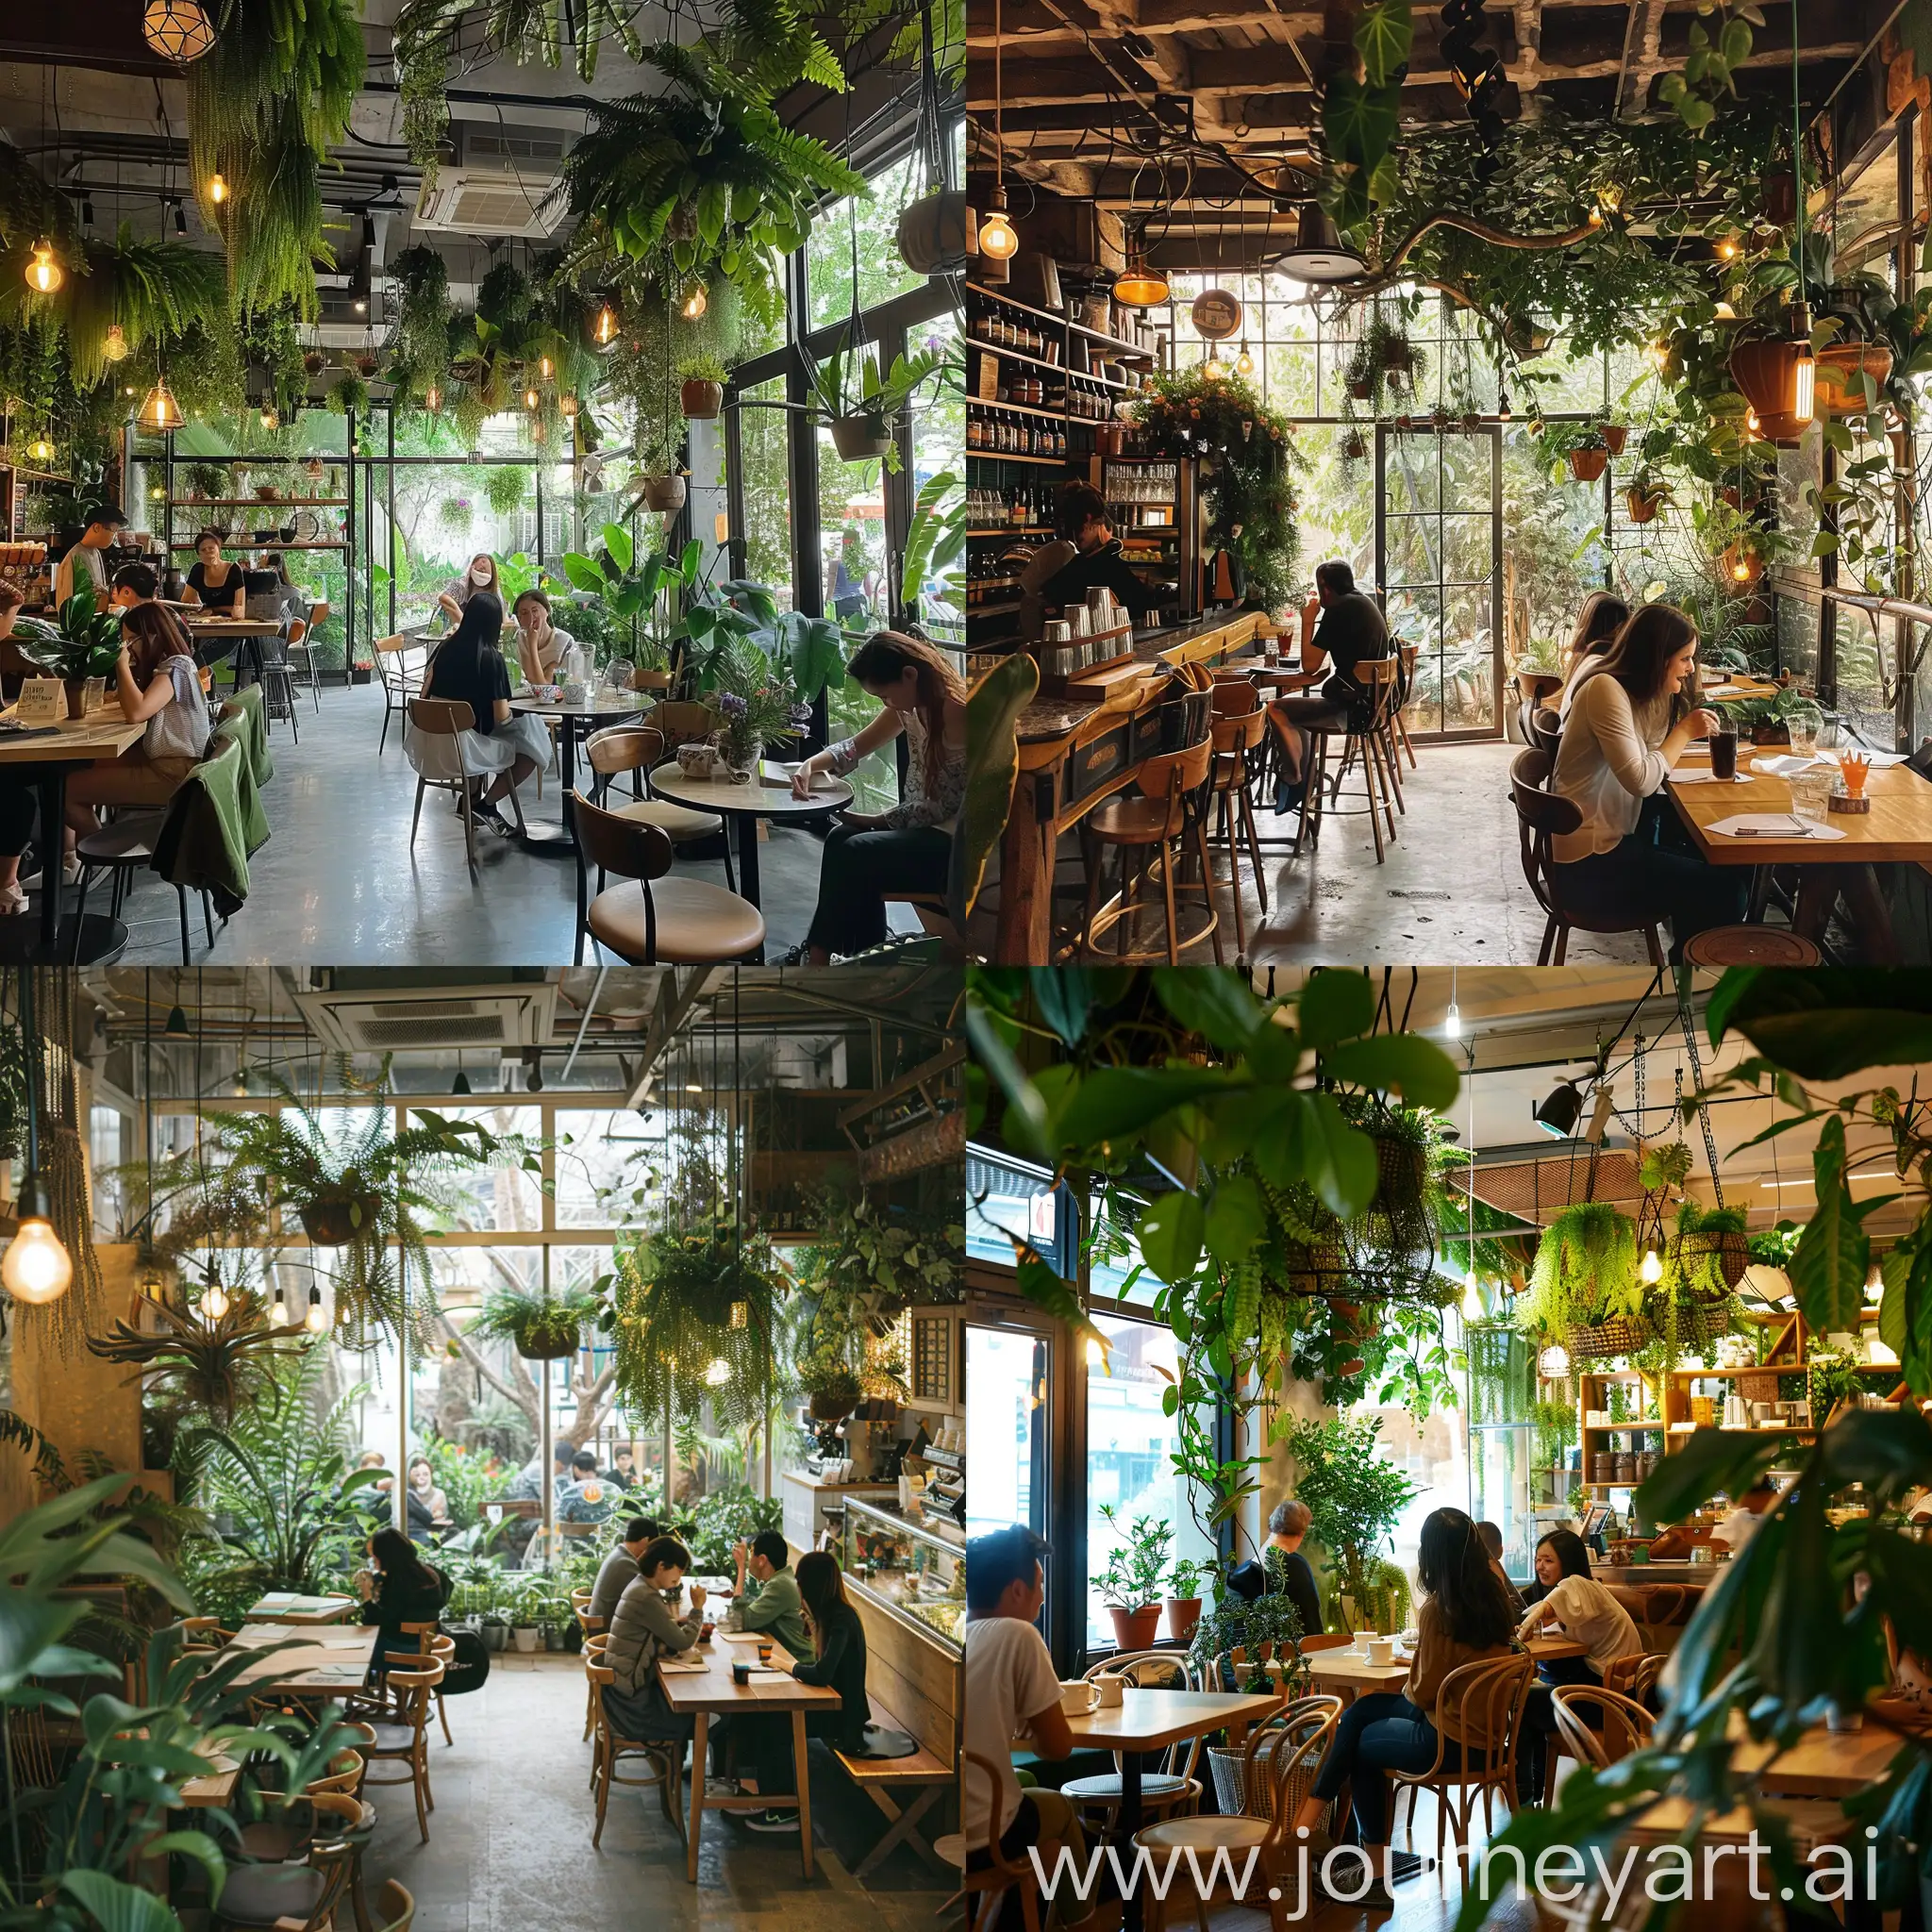 a cozy cafe with lots of greenery and satisfied guests